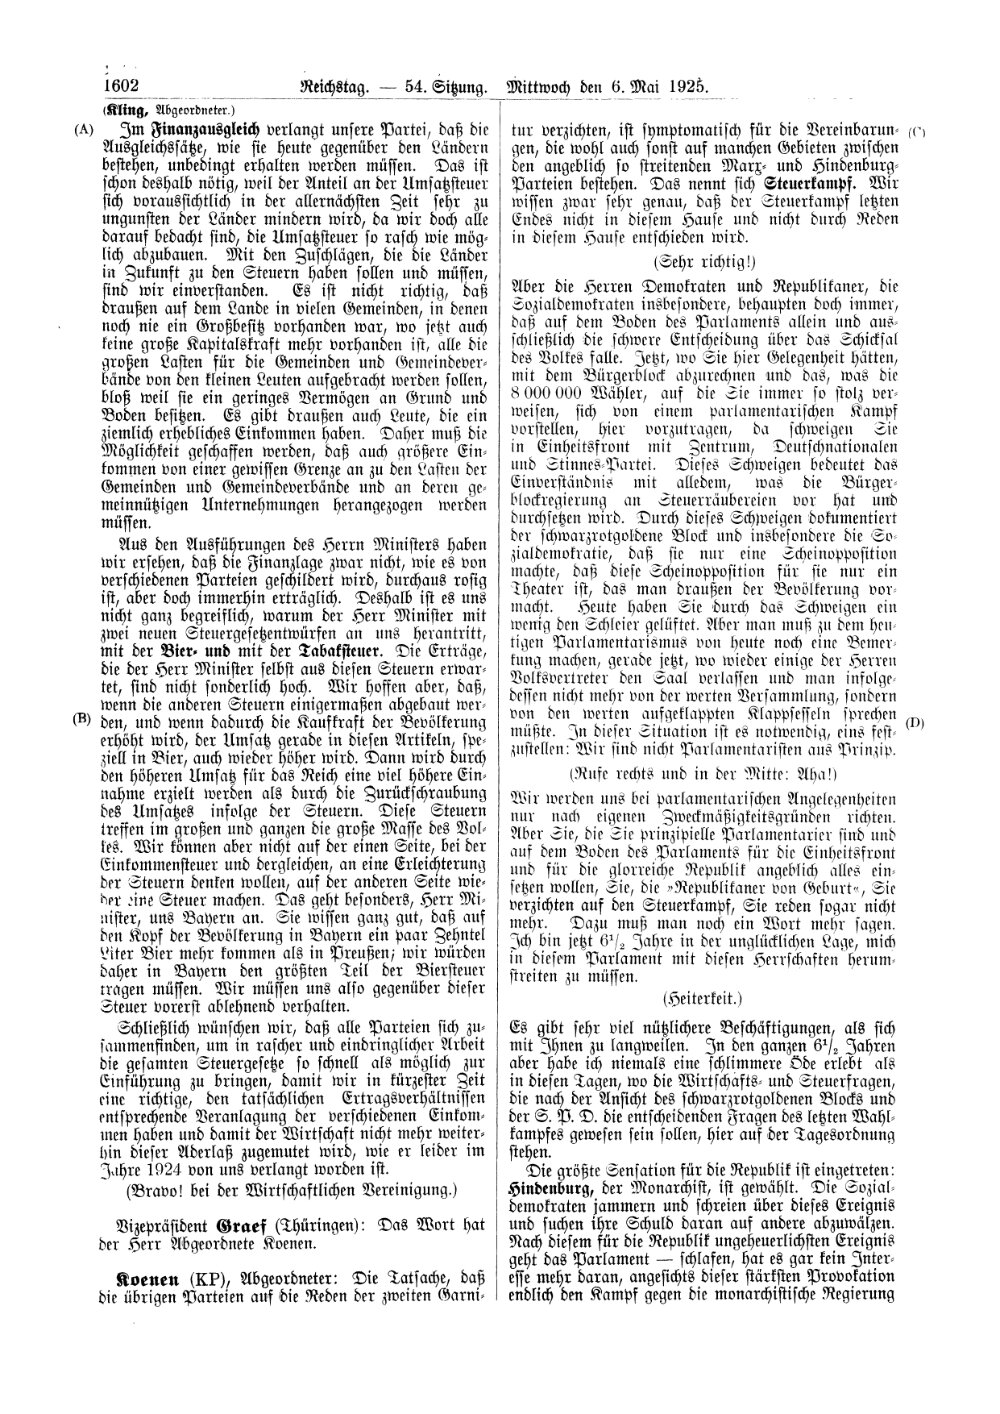 Scan of page 1602